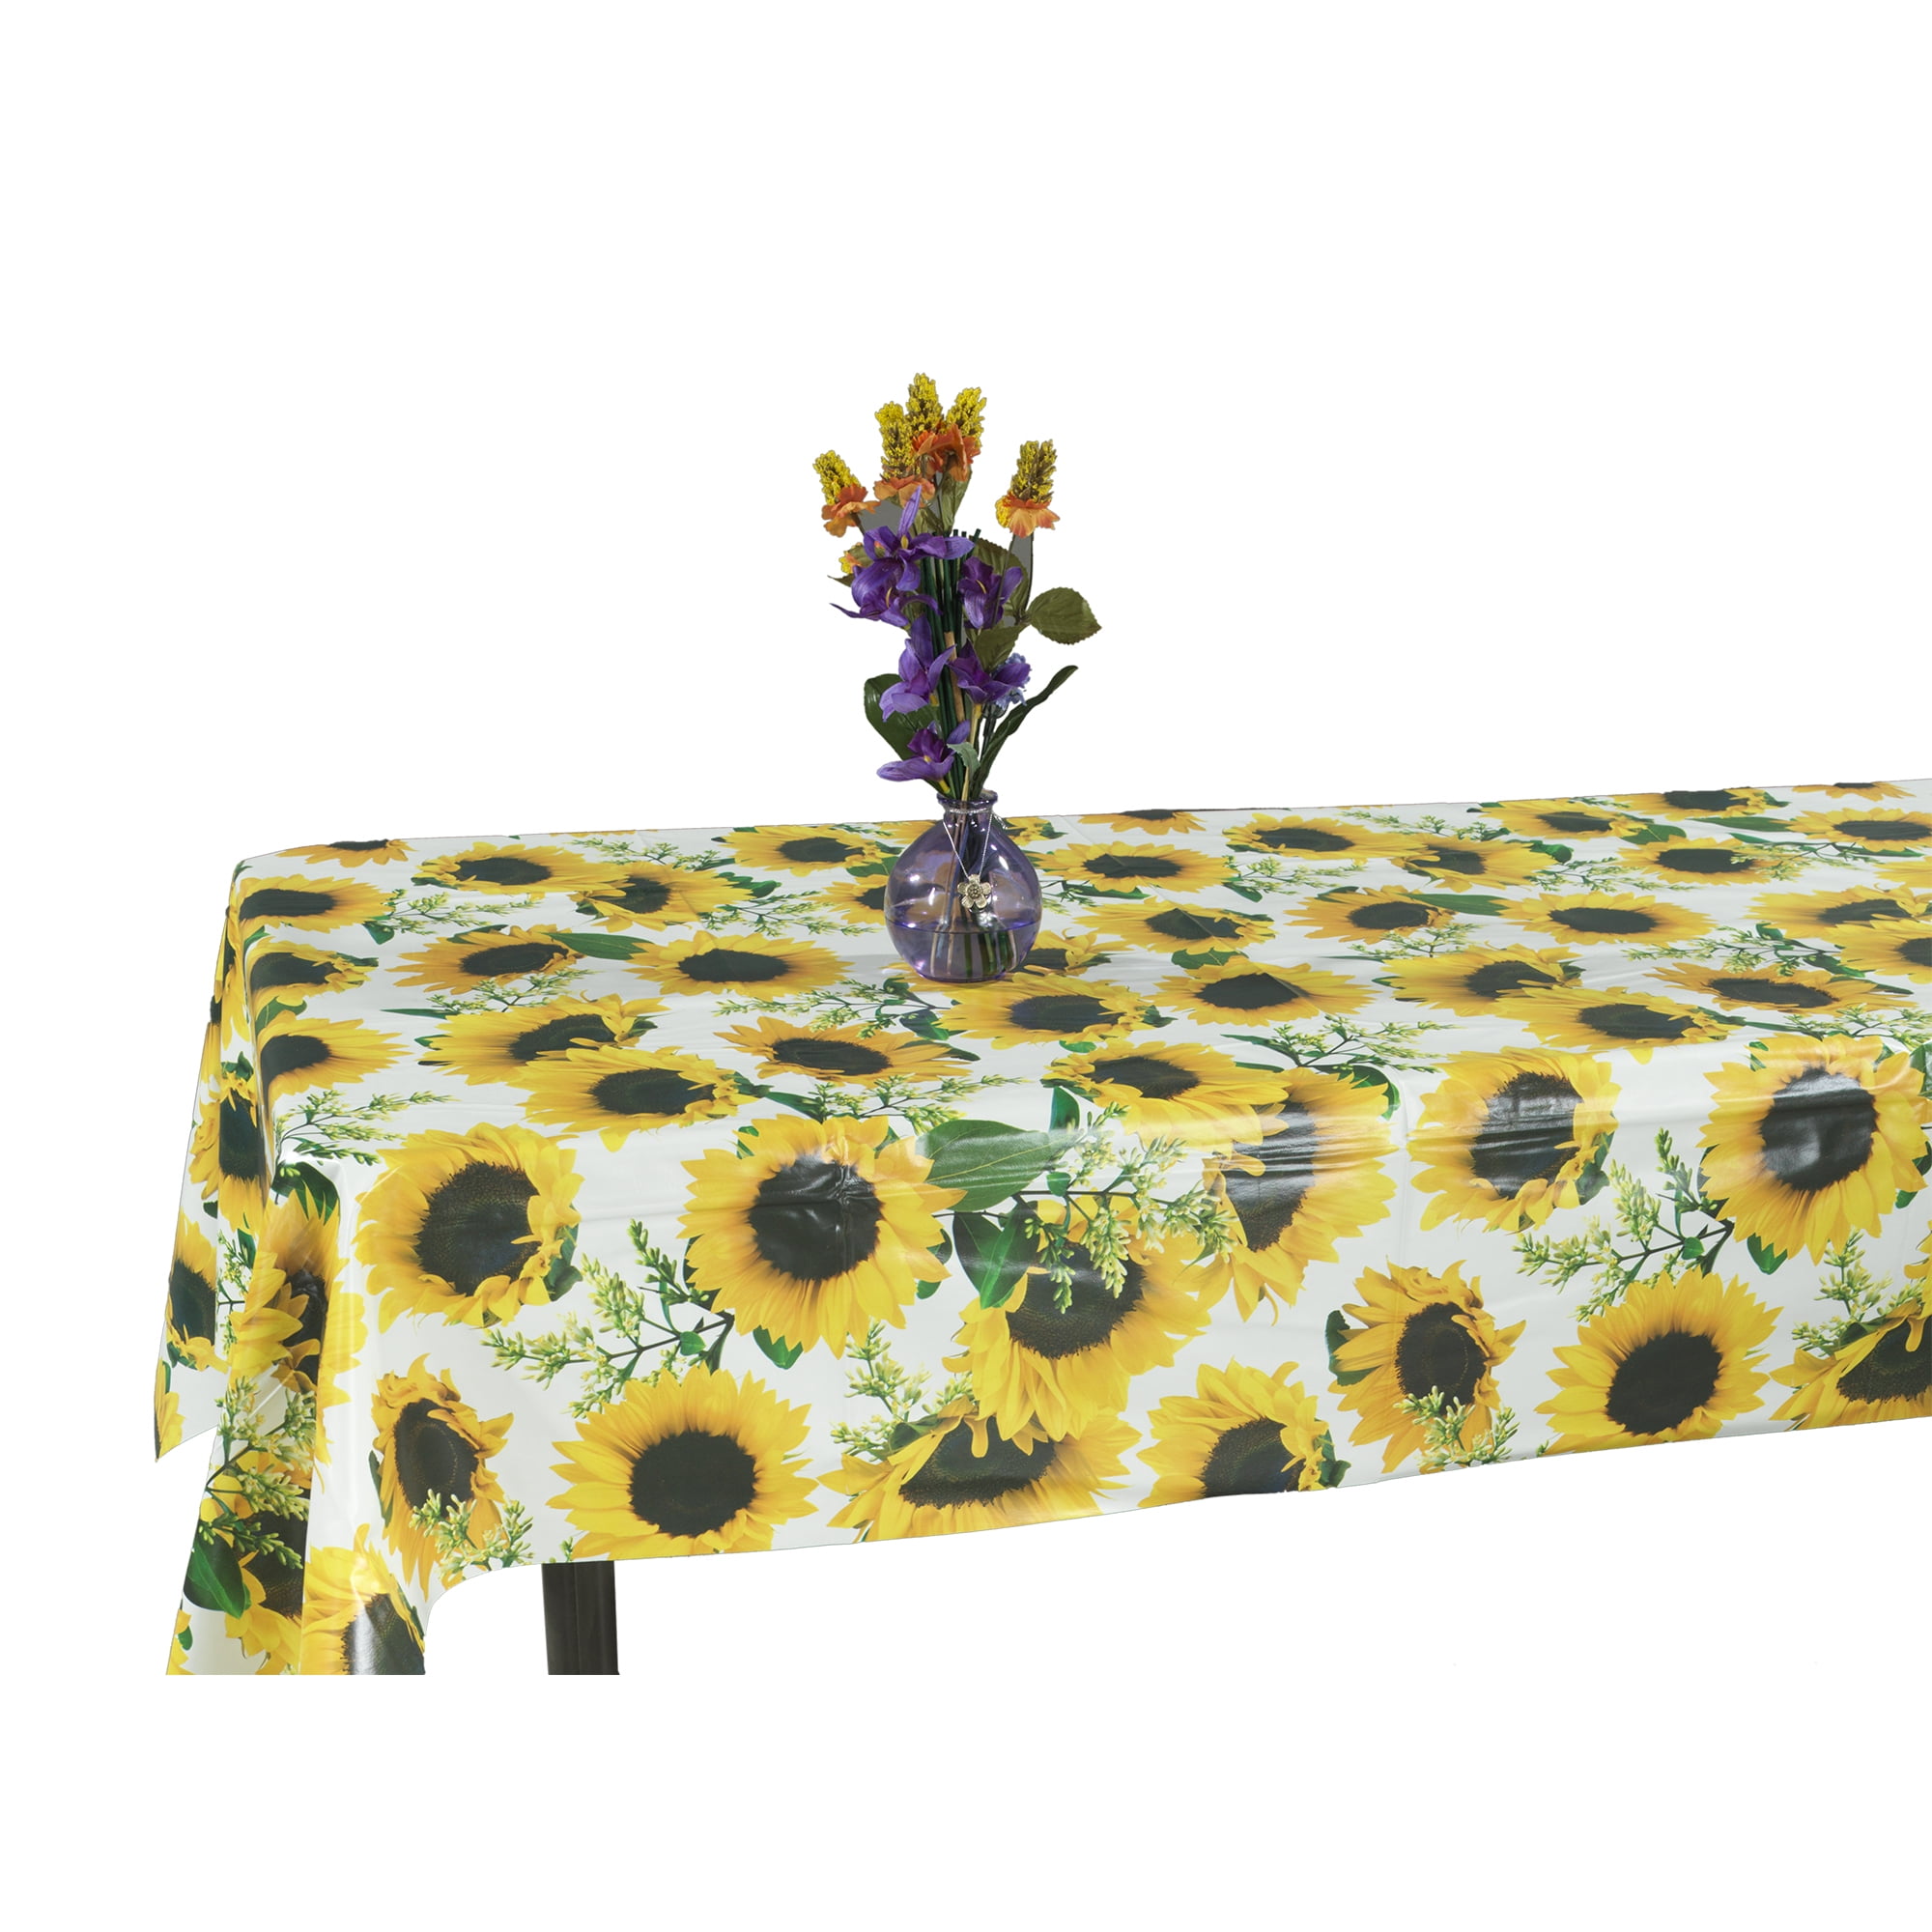 52 x 90 Oblong Home Bargains Plus Sunflower Patch Vinyl Flannel Backed Tablecloth Contemporary Yellow Floral Print Indoor/Outdoor BBQ and Picnic Tablecloth 